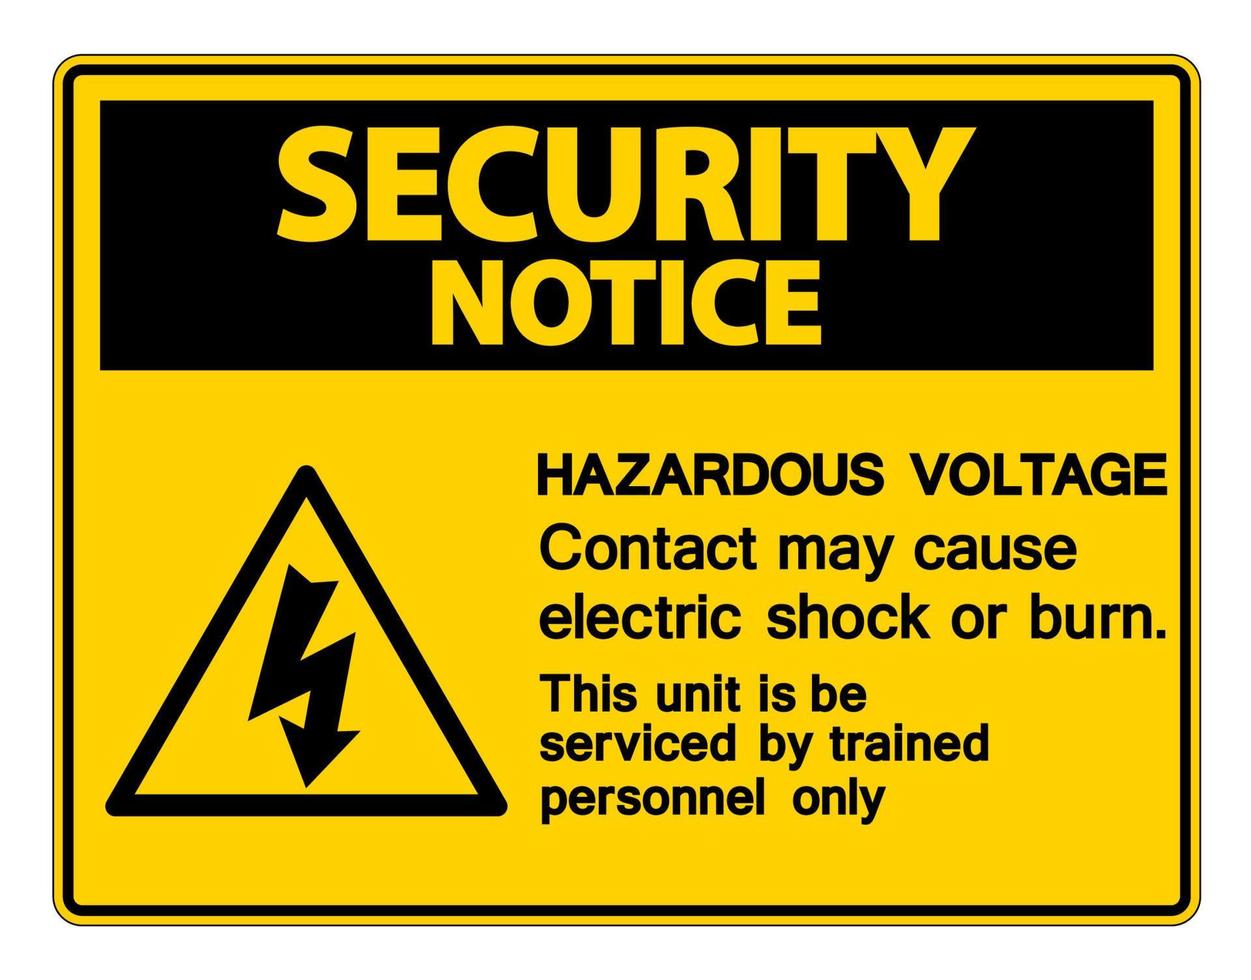 Security Notice Hazardous Voltage Contact May Cause Electric Shock Or Burn Sign On White Background vector